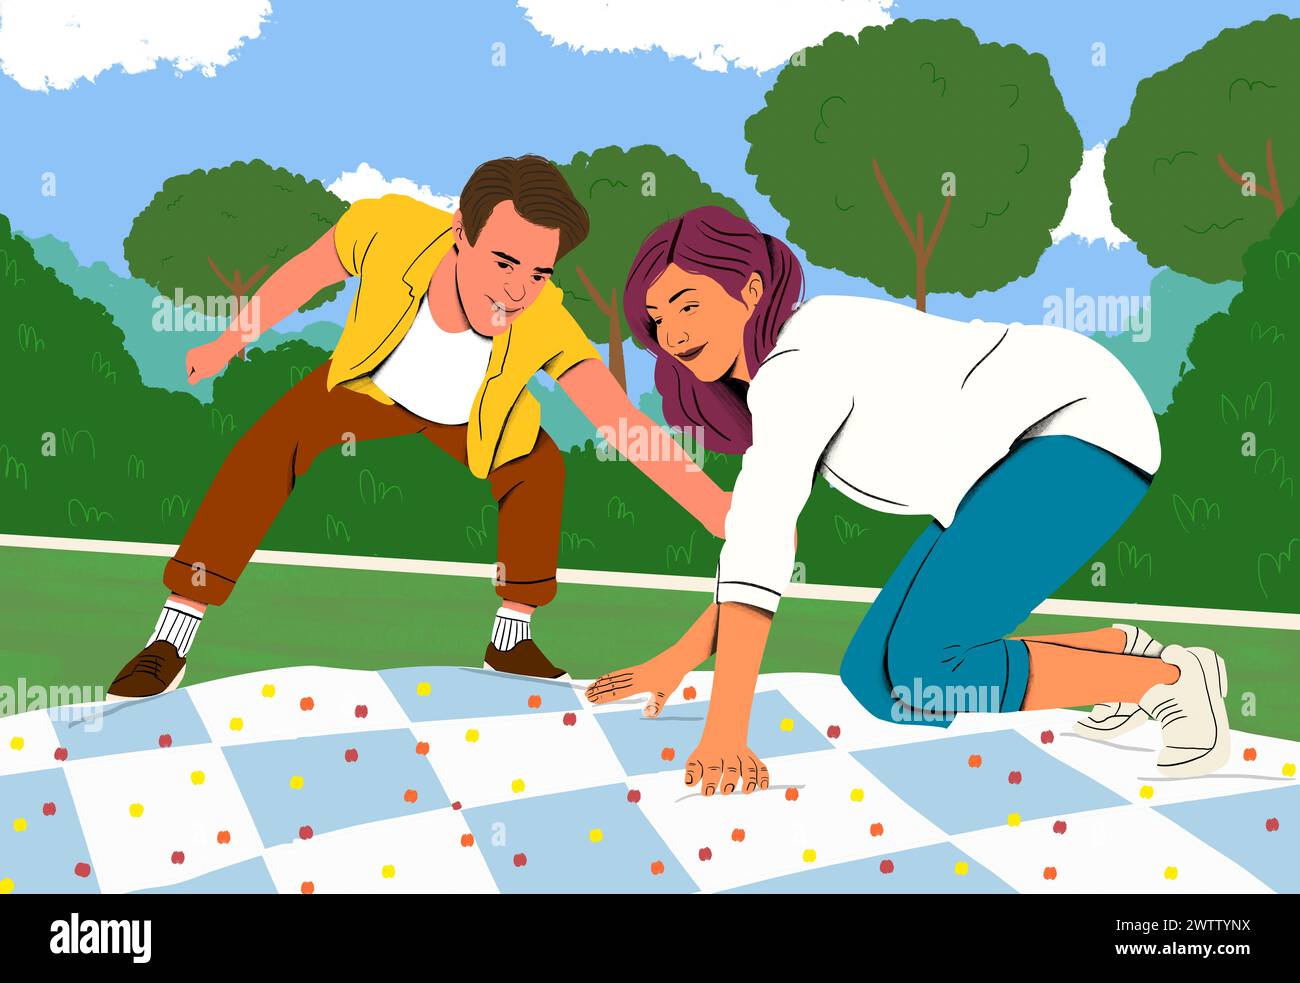 Two friends enjoying a playful game outdoors on a sunny day. Stock Photo